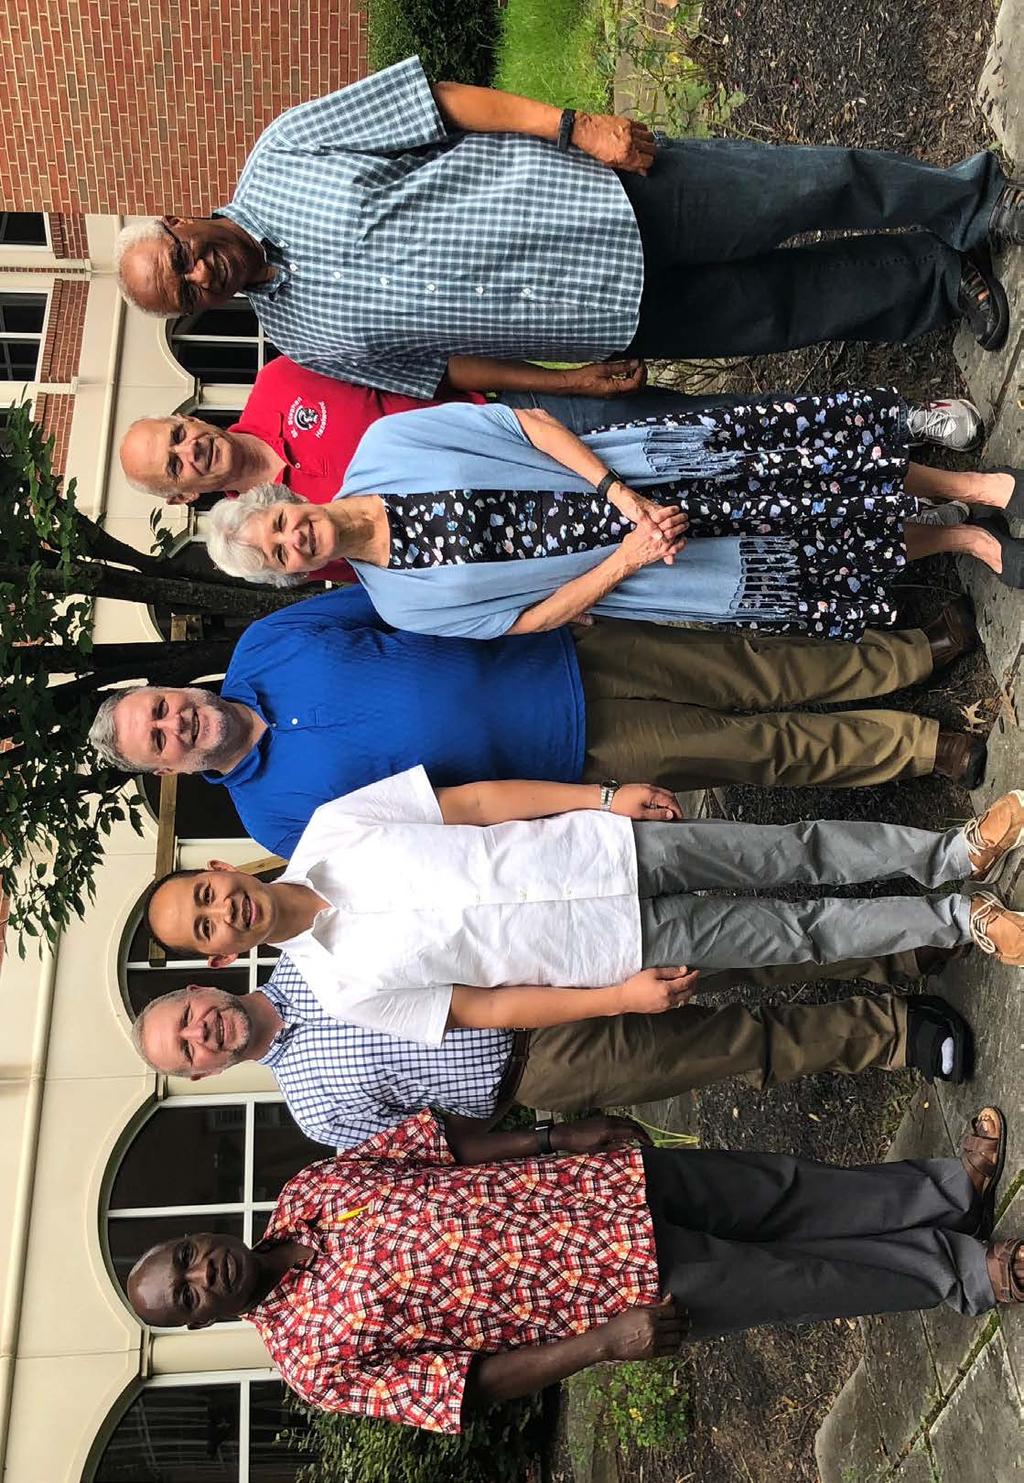 Provincial Council Gathers in Pennsylvania for Planning and Fellowship The newly appointed U.S. Provincial Council met for a planning session the week of August 6, 2018, in Bethel Park, Pennsylvania.